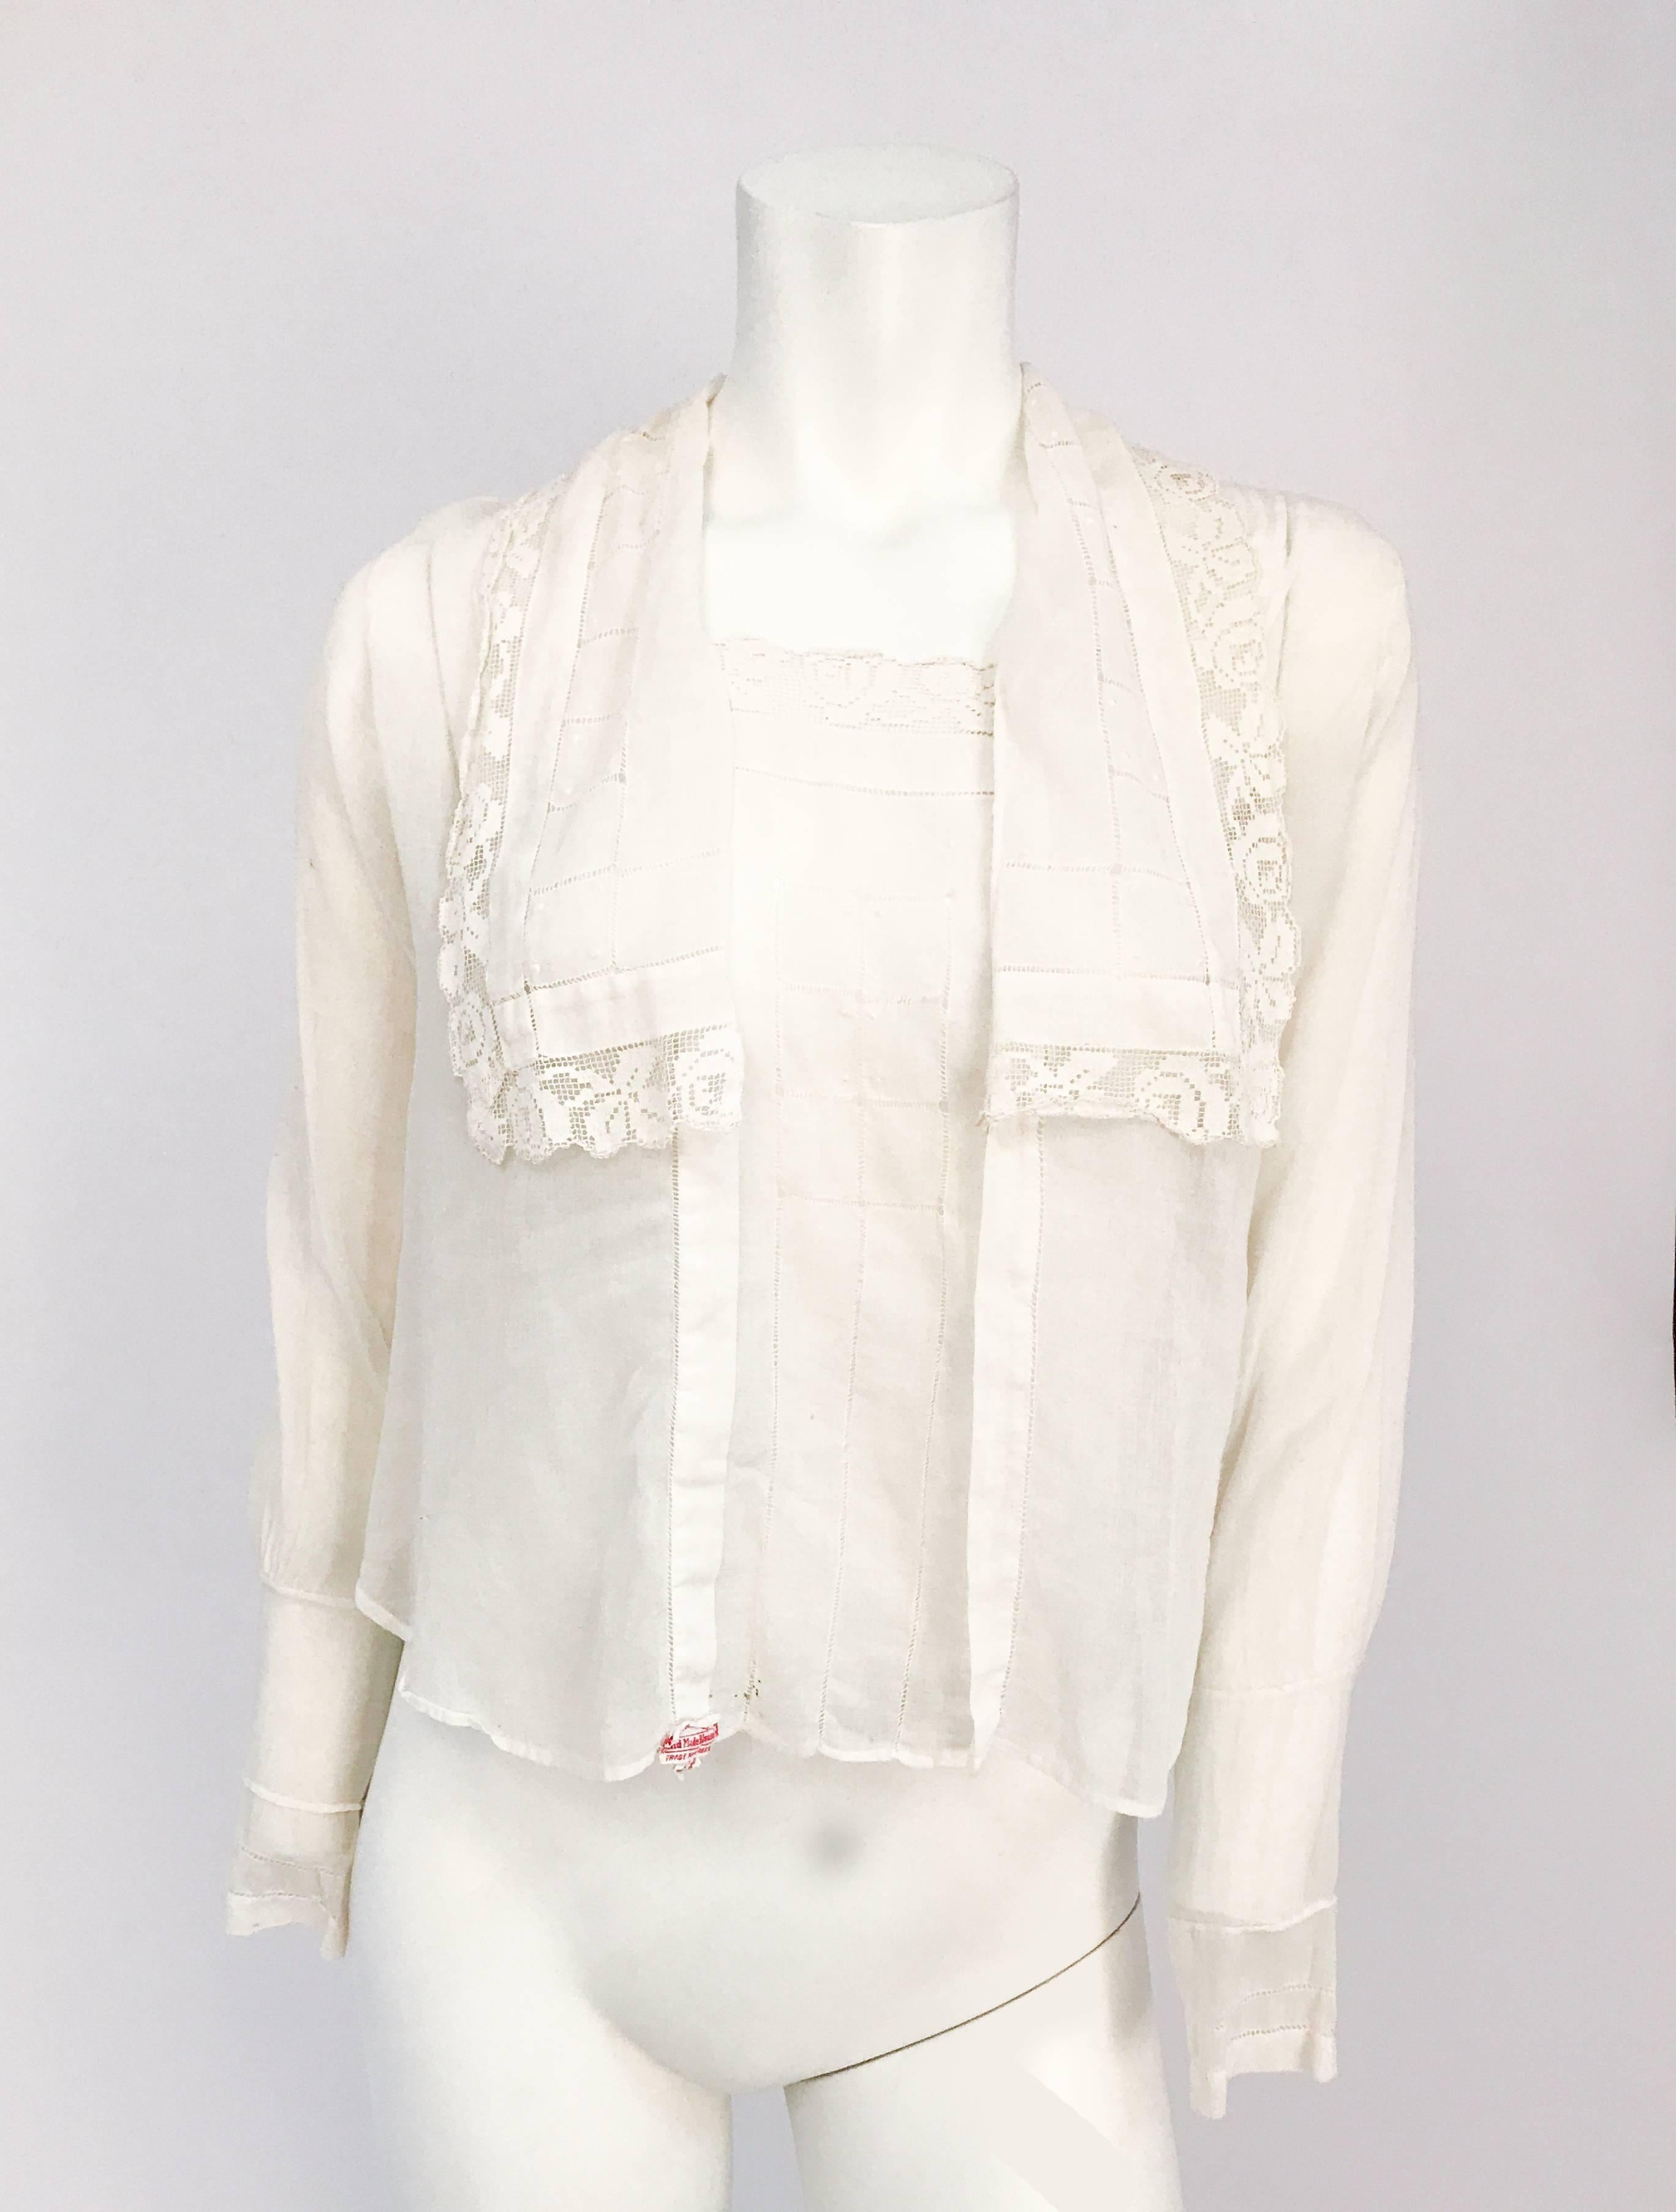 Late 1910s White Blouse With Lace and Pull Work. Handmade blouse with pull work, french knot details, and matching lace trim. Oversized collar with seashell buttons and hook and eye closures.